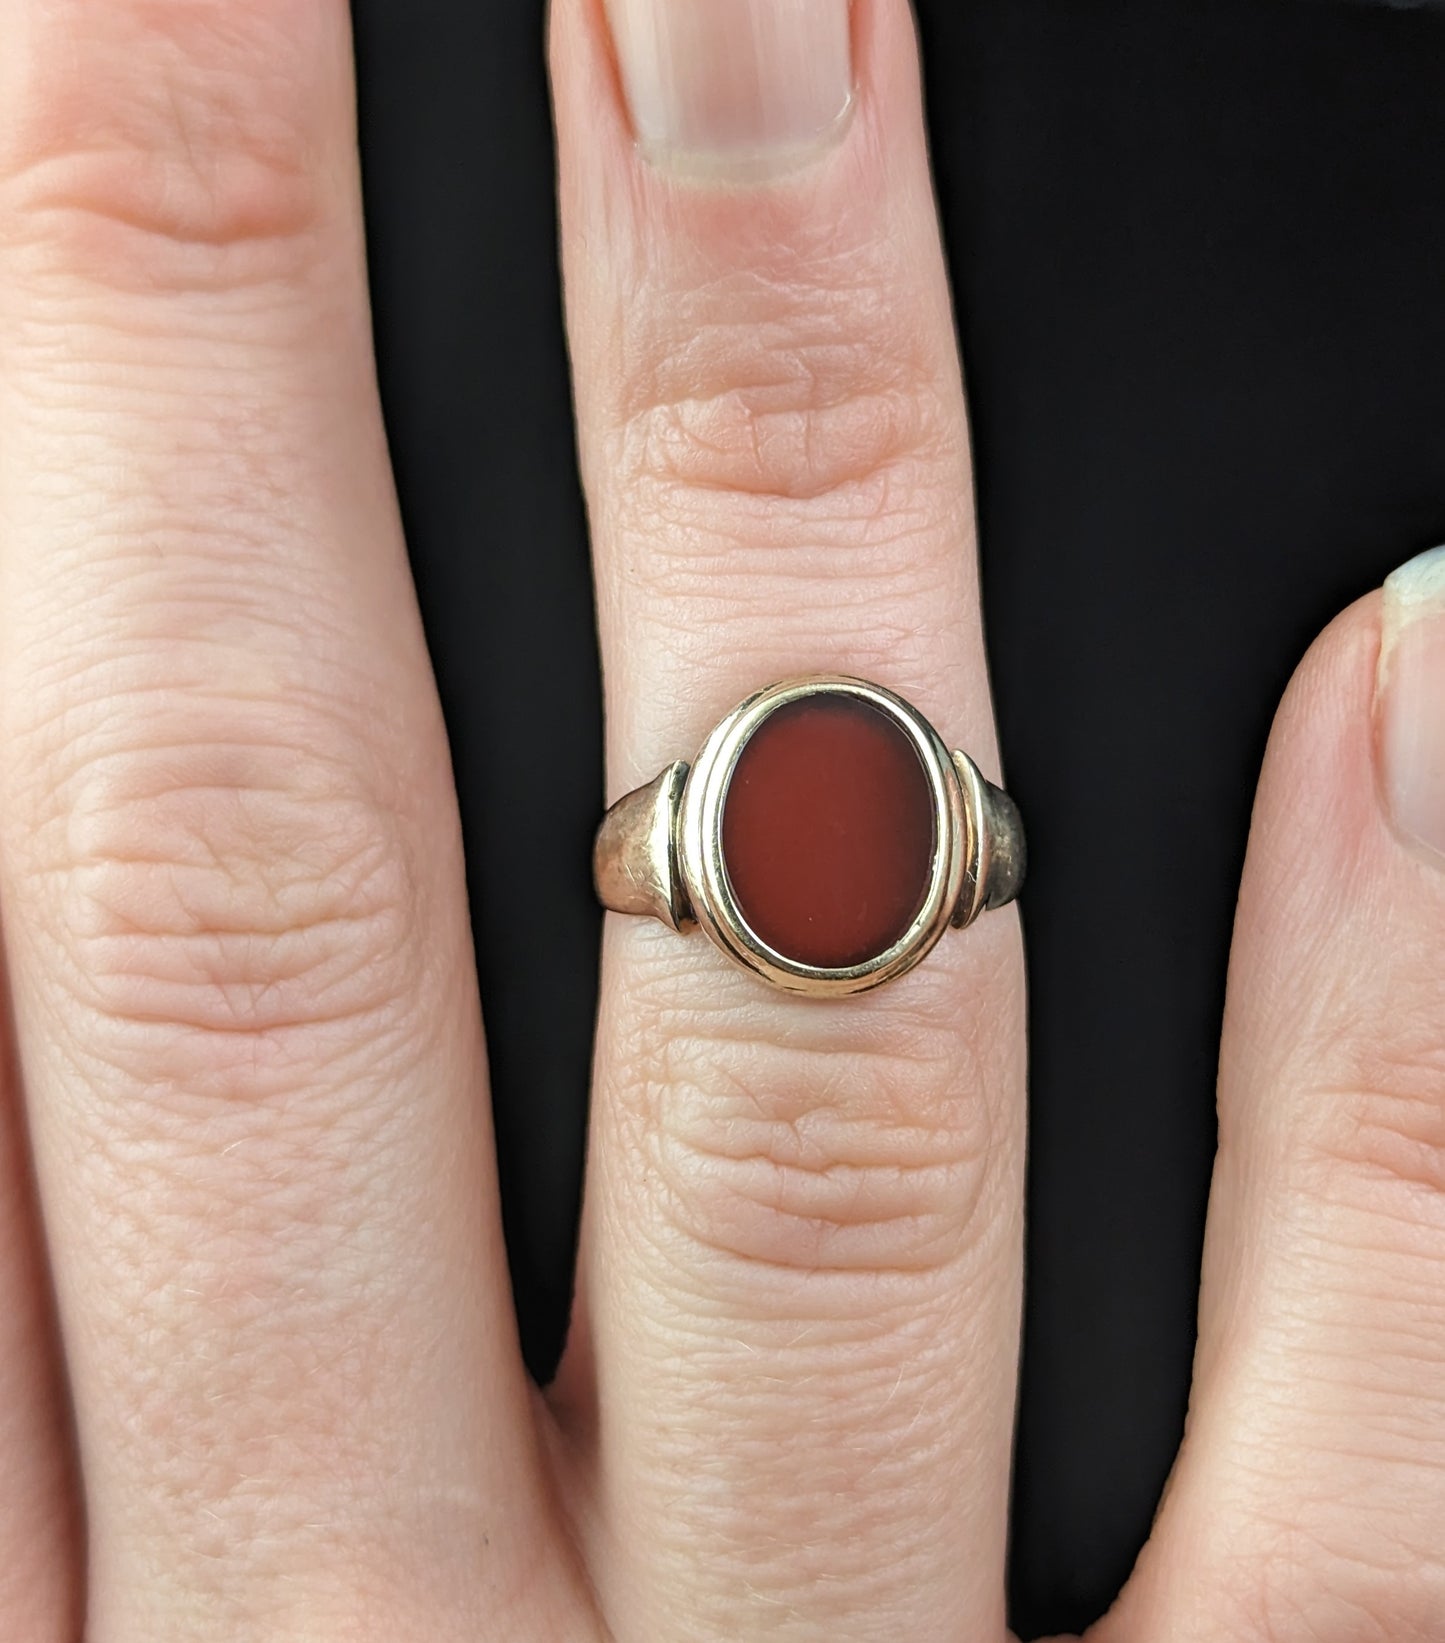 Antique Art Deco Carnelian Signet ring, 9ct gold, Pinky ring